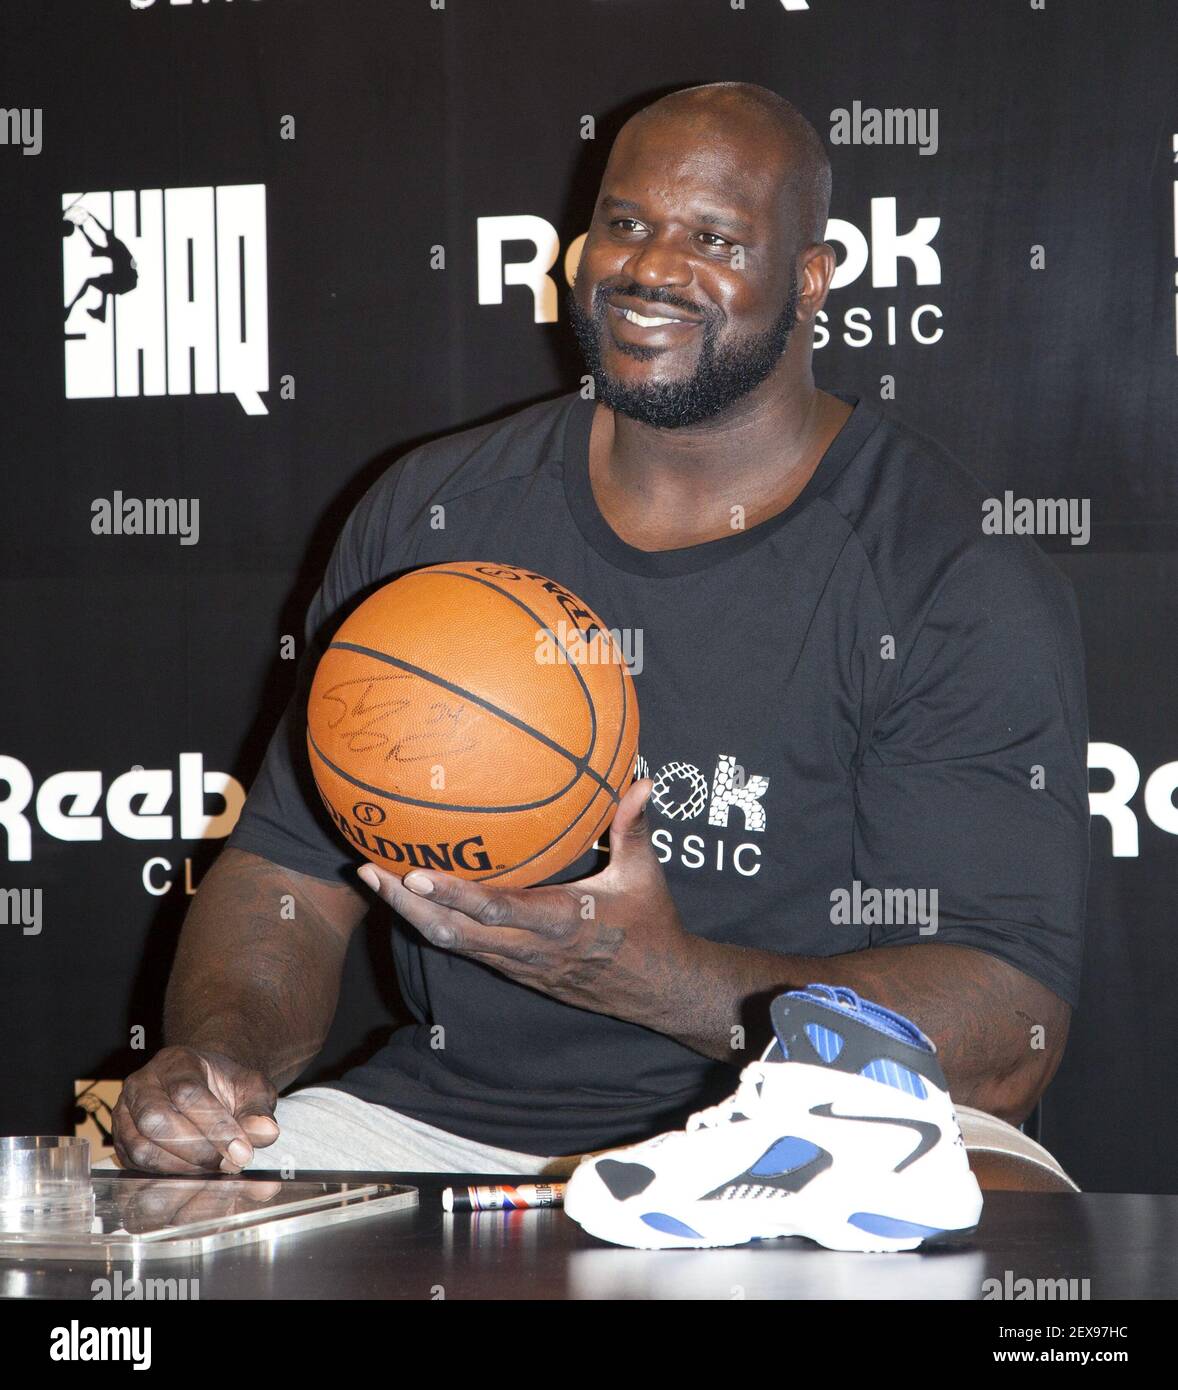 20 August 2015 - Seoul, South Korea : Shaquille Rashaun O'Neal attends the  hands printing event at Reebok Classic store in Seoul, South korea on  August 20, 2015. Shaquille O'Neal sport brand